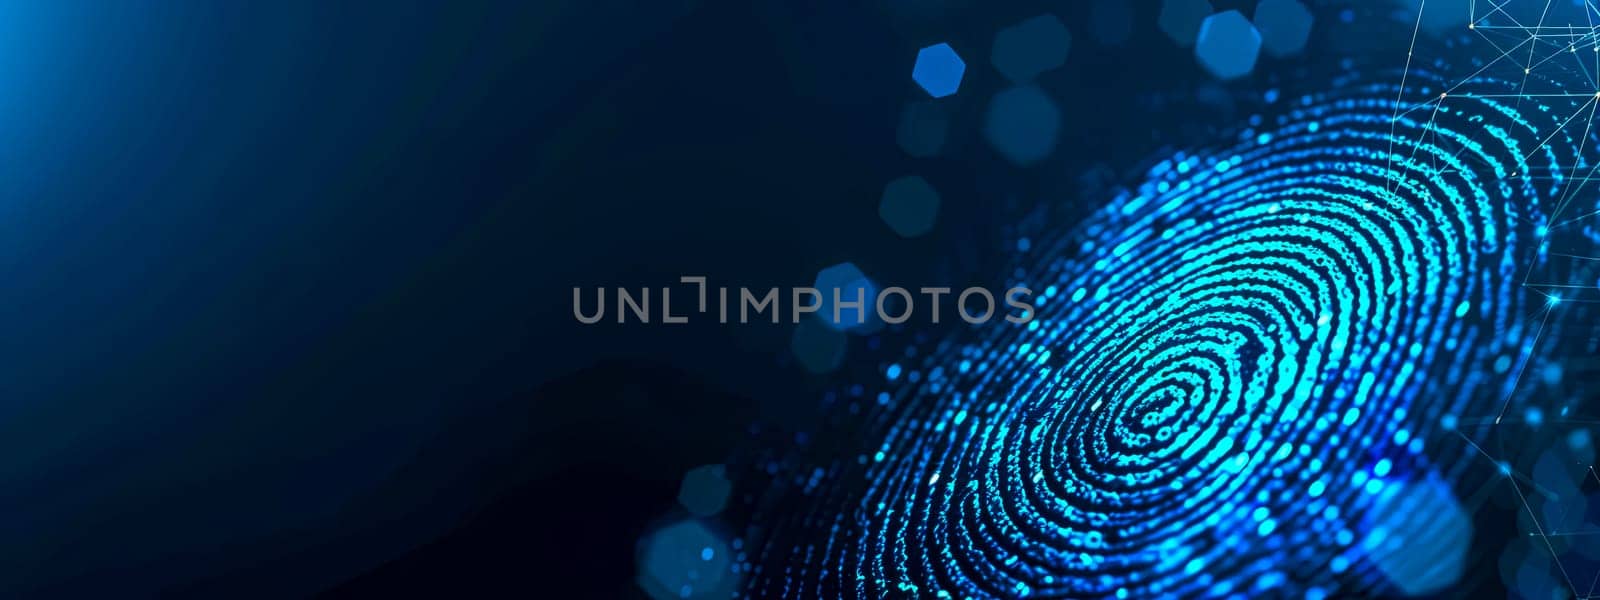 Blue Digital Fingerprint Biometrics for Secure Authentication and Cyber Security by Edophoto